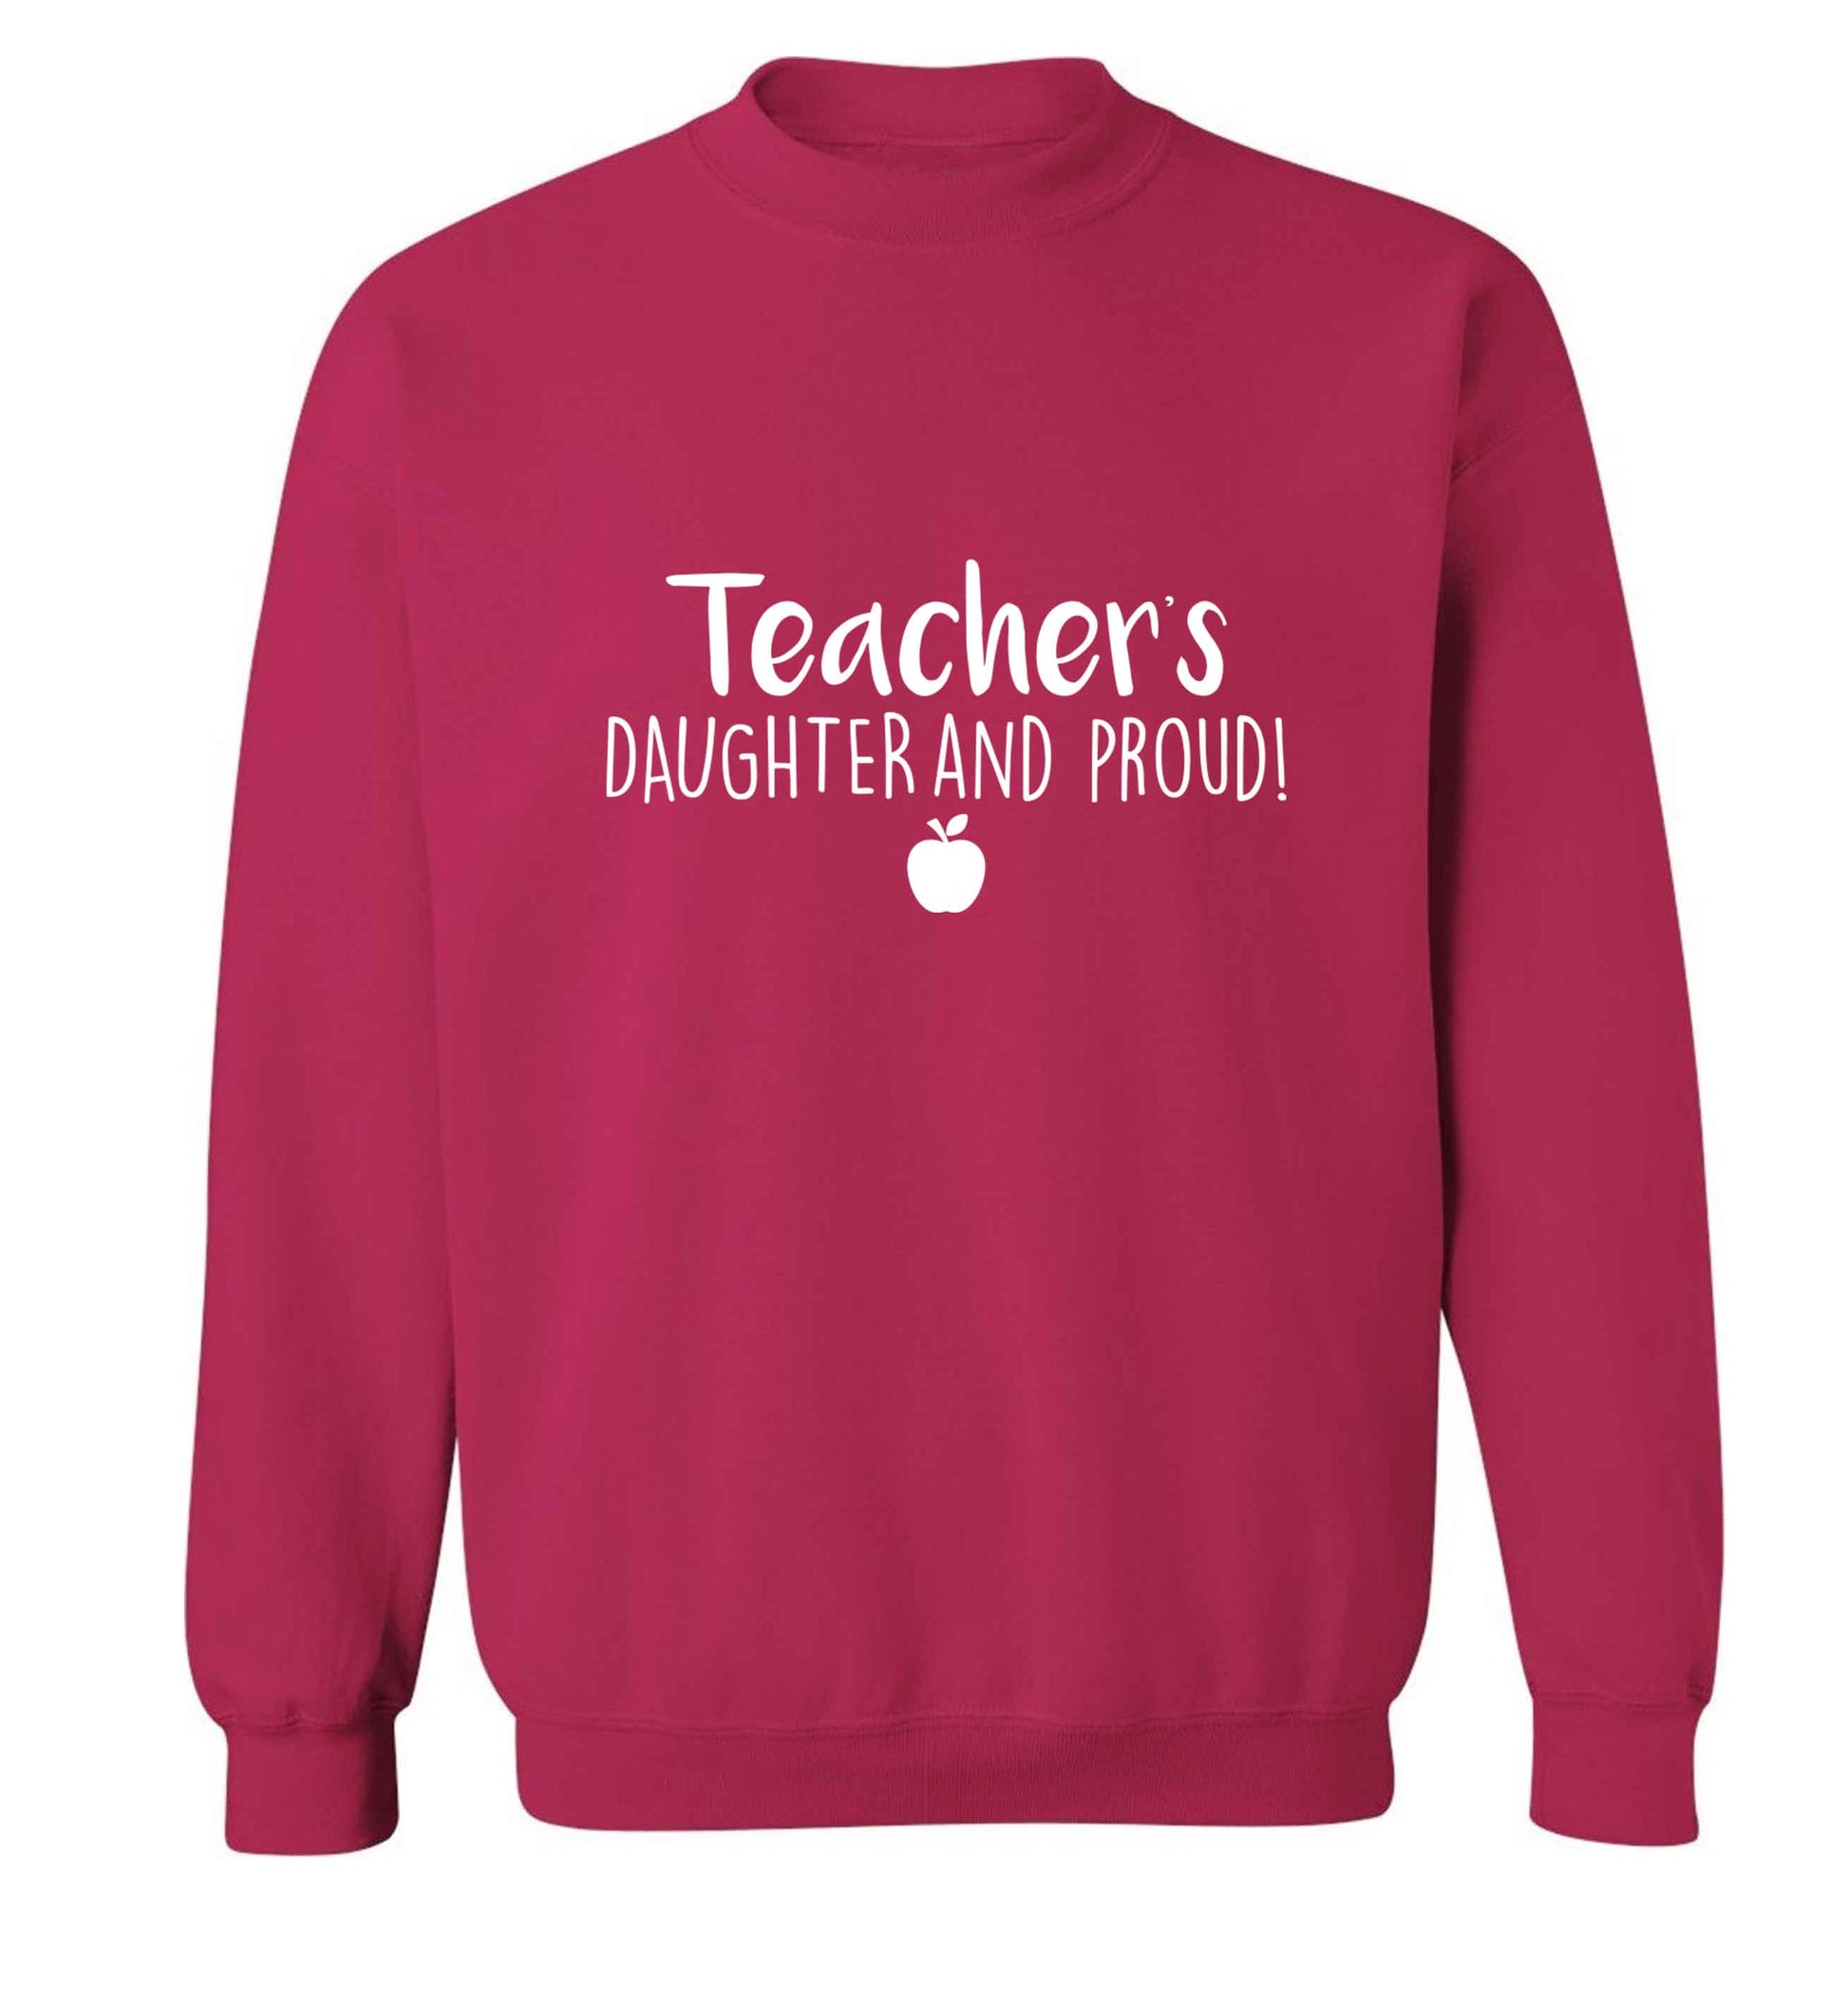 Teachers daughter and proud adult's unisex pink sweater 2XL